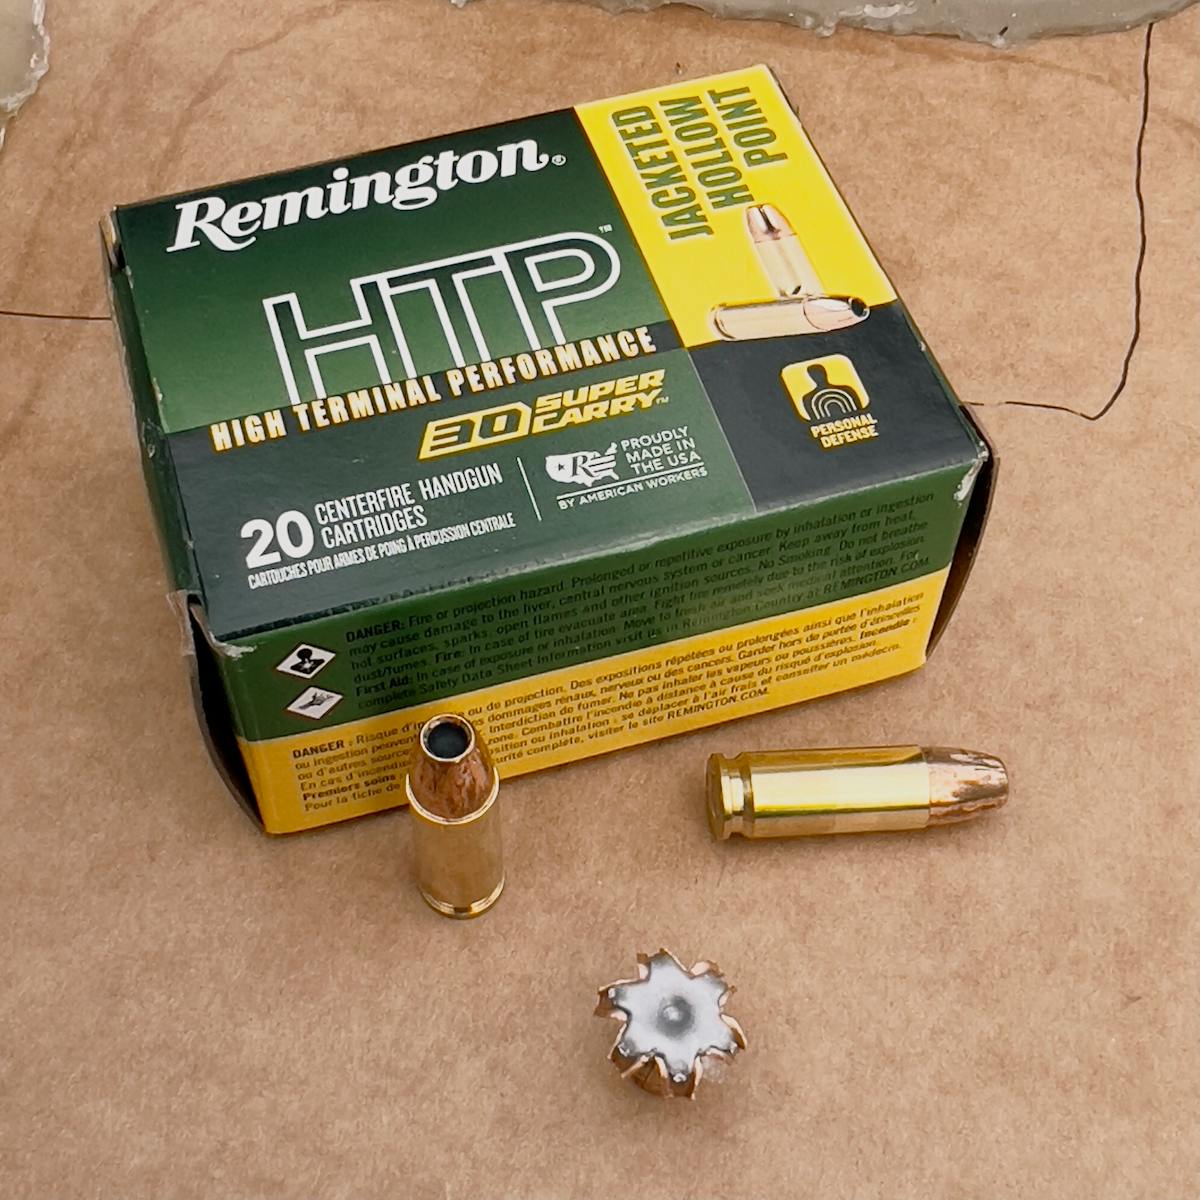 We used Remington HTP JHP cartridges for this test. 30 SC cartridges are hard to get at the moment, but we anticipate that all of the 30 SC offerings will be out there soon. This turned out to be an outstanding performer.